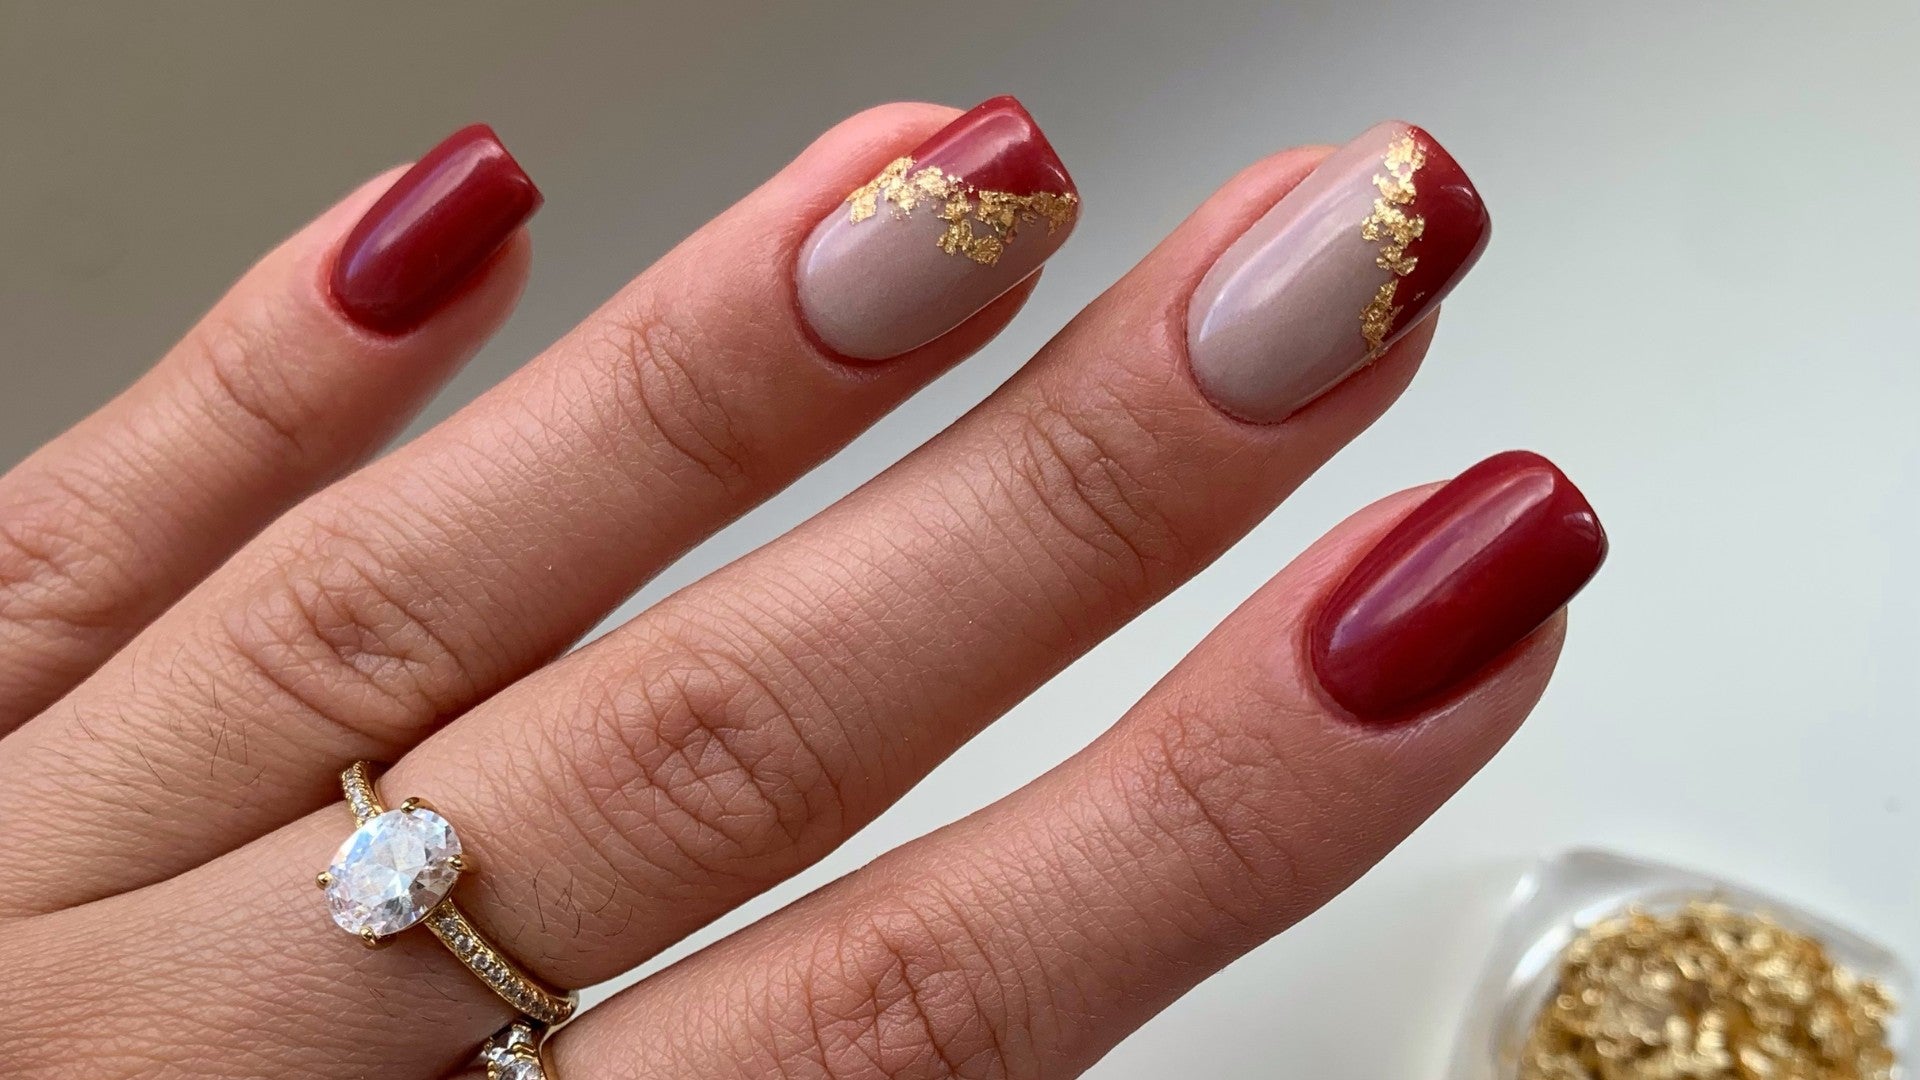 12 Nail Art Ideas for Pretty Toes This Holiday Season – Faces Canada